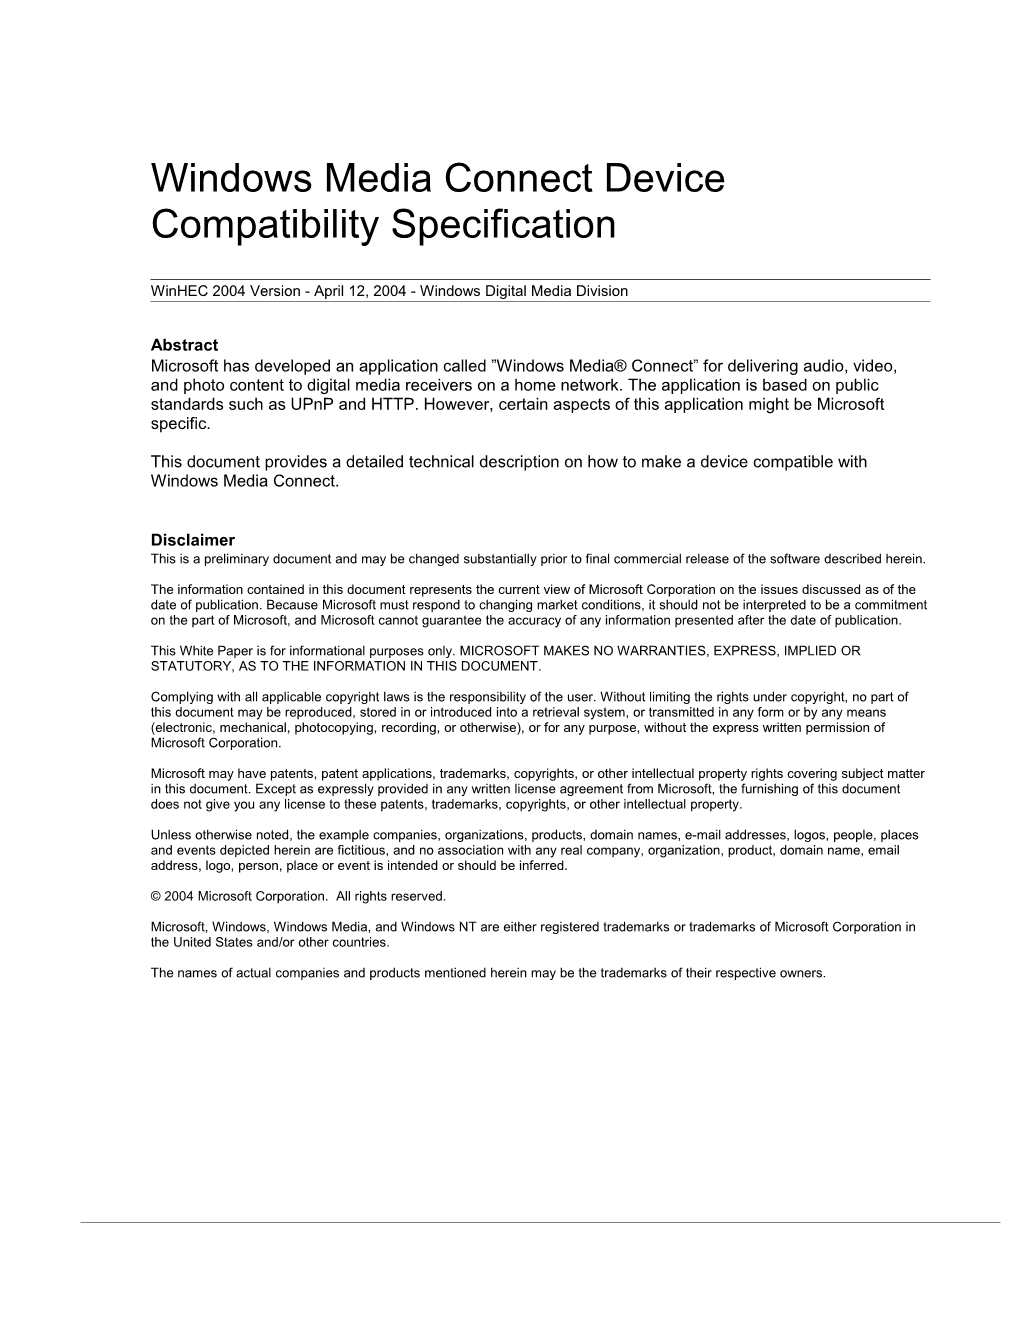 Windows Media Connect Device Compatibility Specification